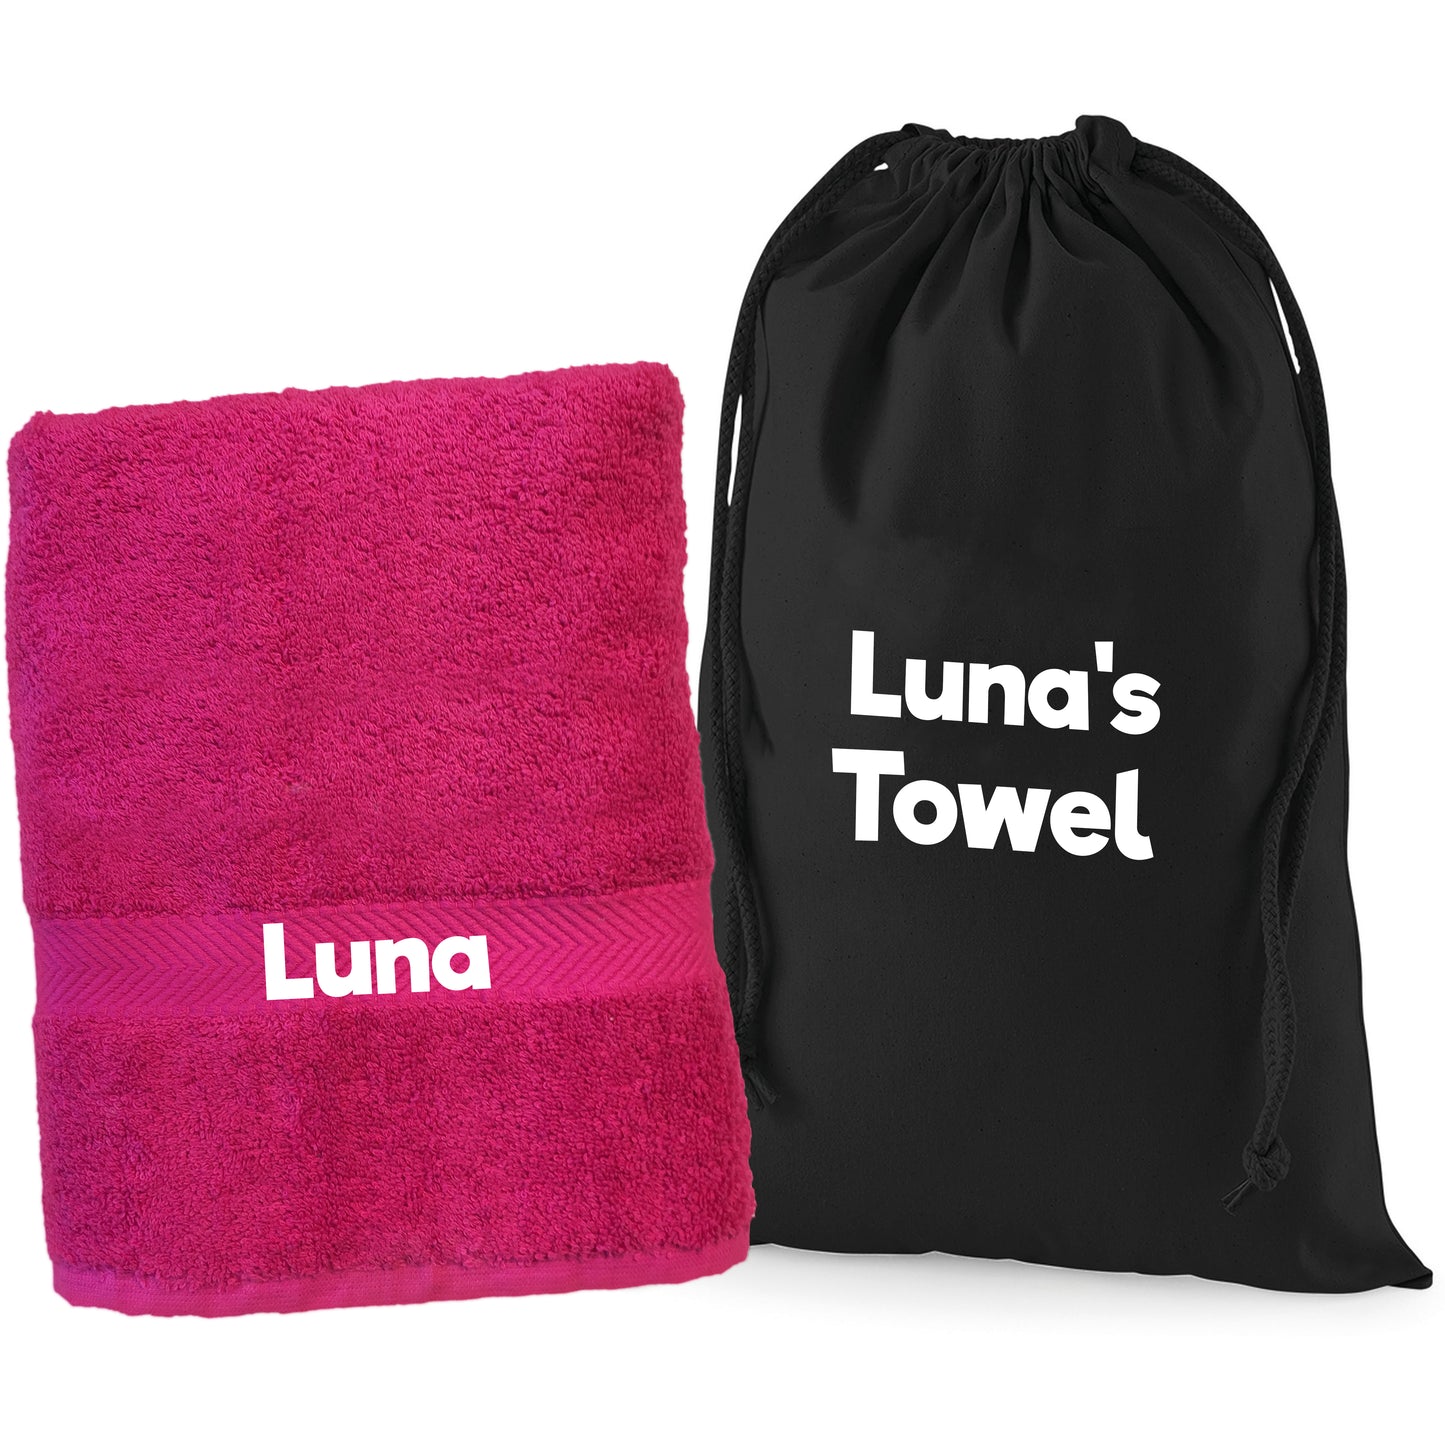 Hot Pink Cerise Pet Towel Personalised With Name or Wording